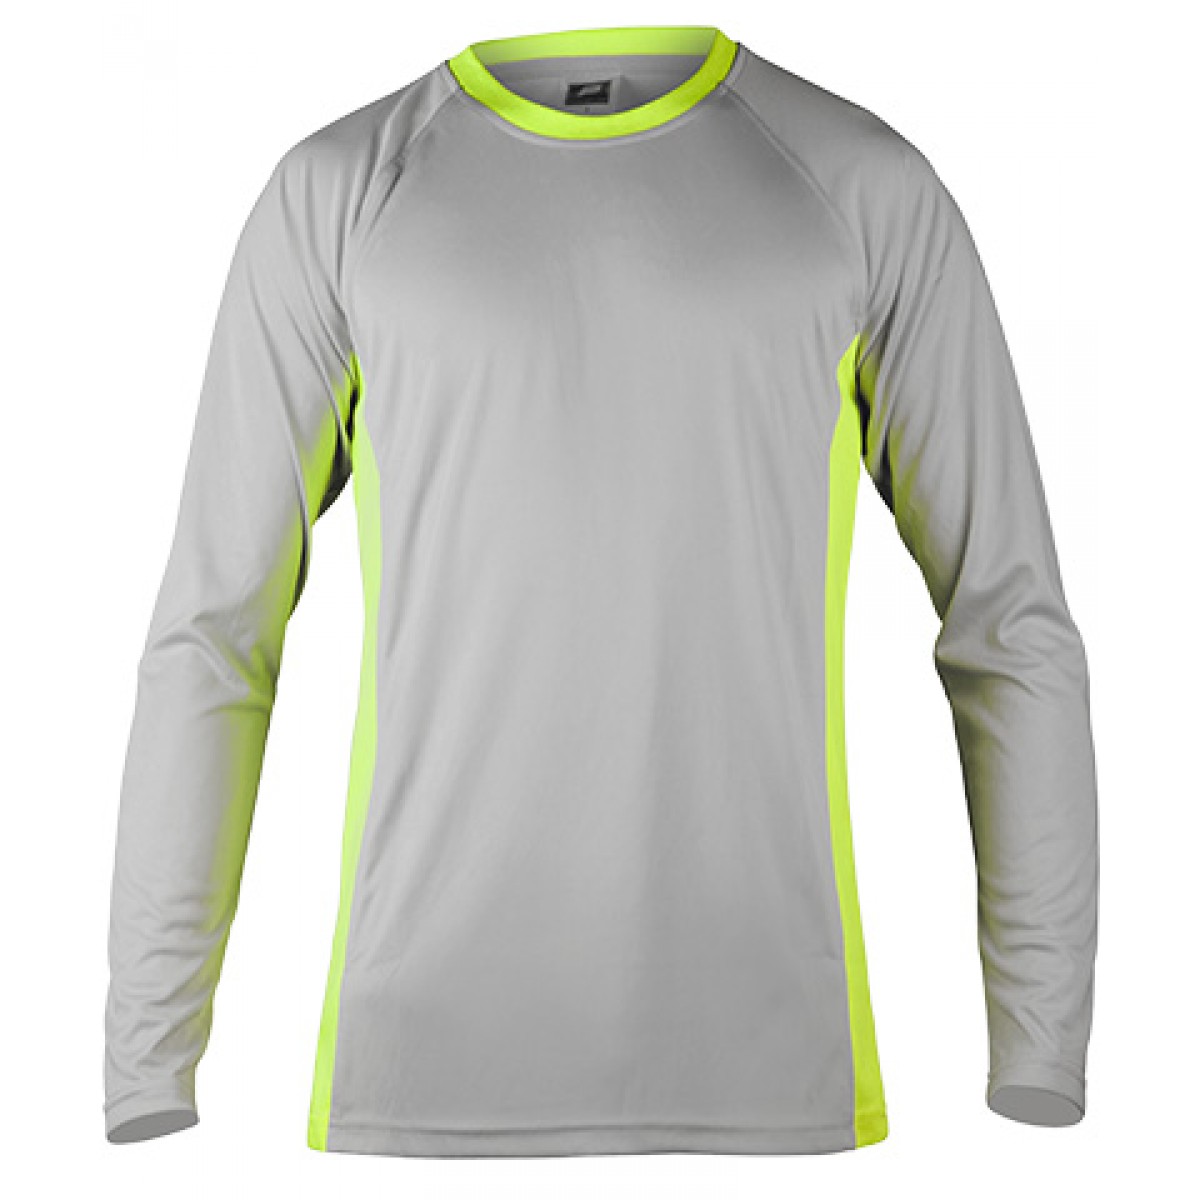 Long Sleeve Gray Performance With Neon Green Side Insert